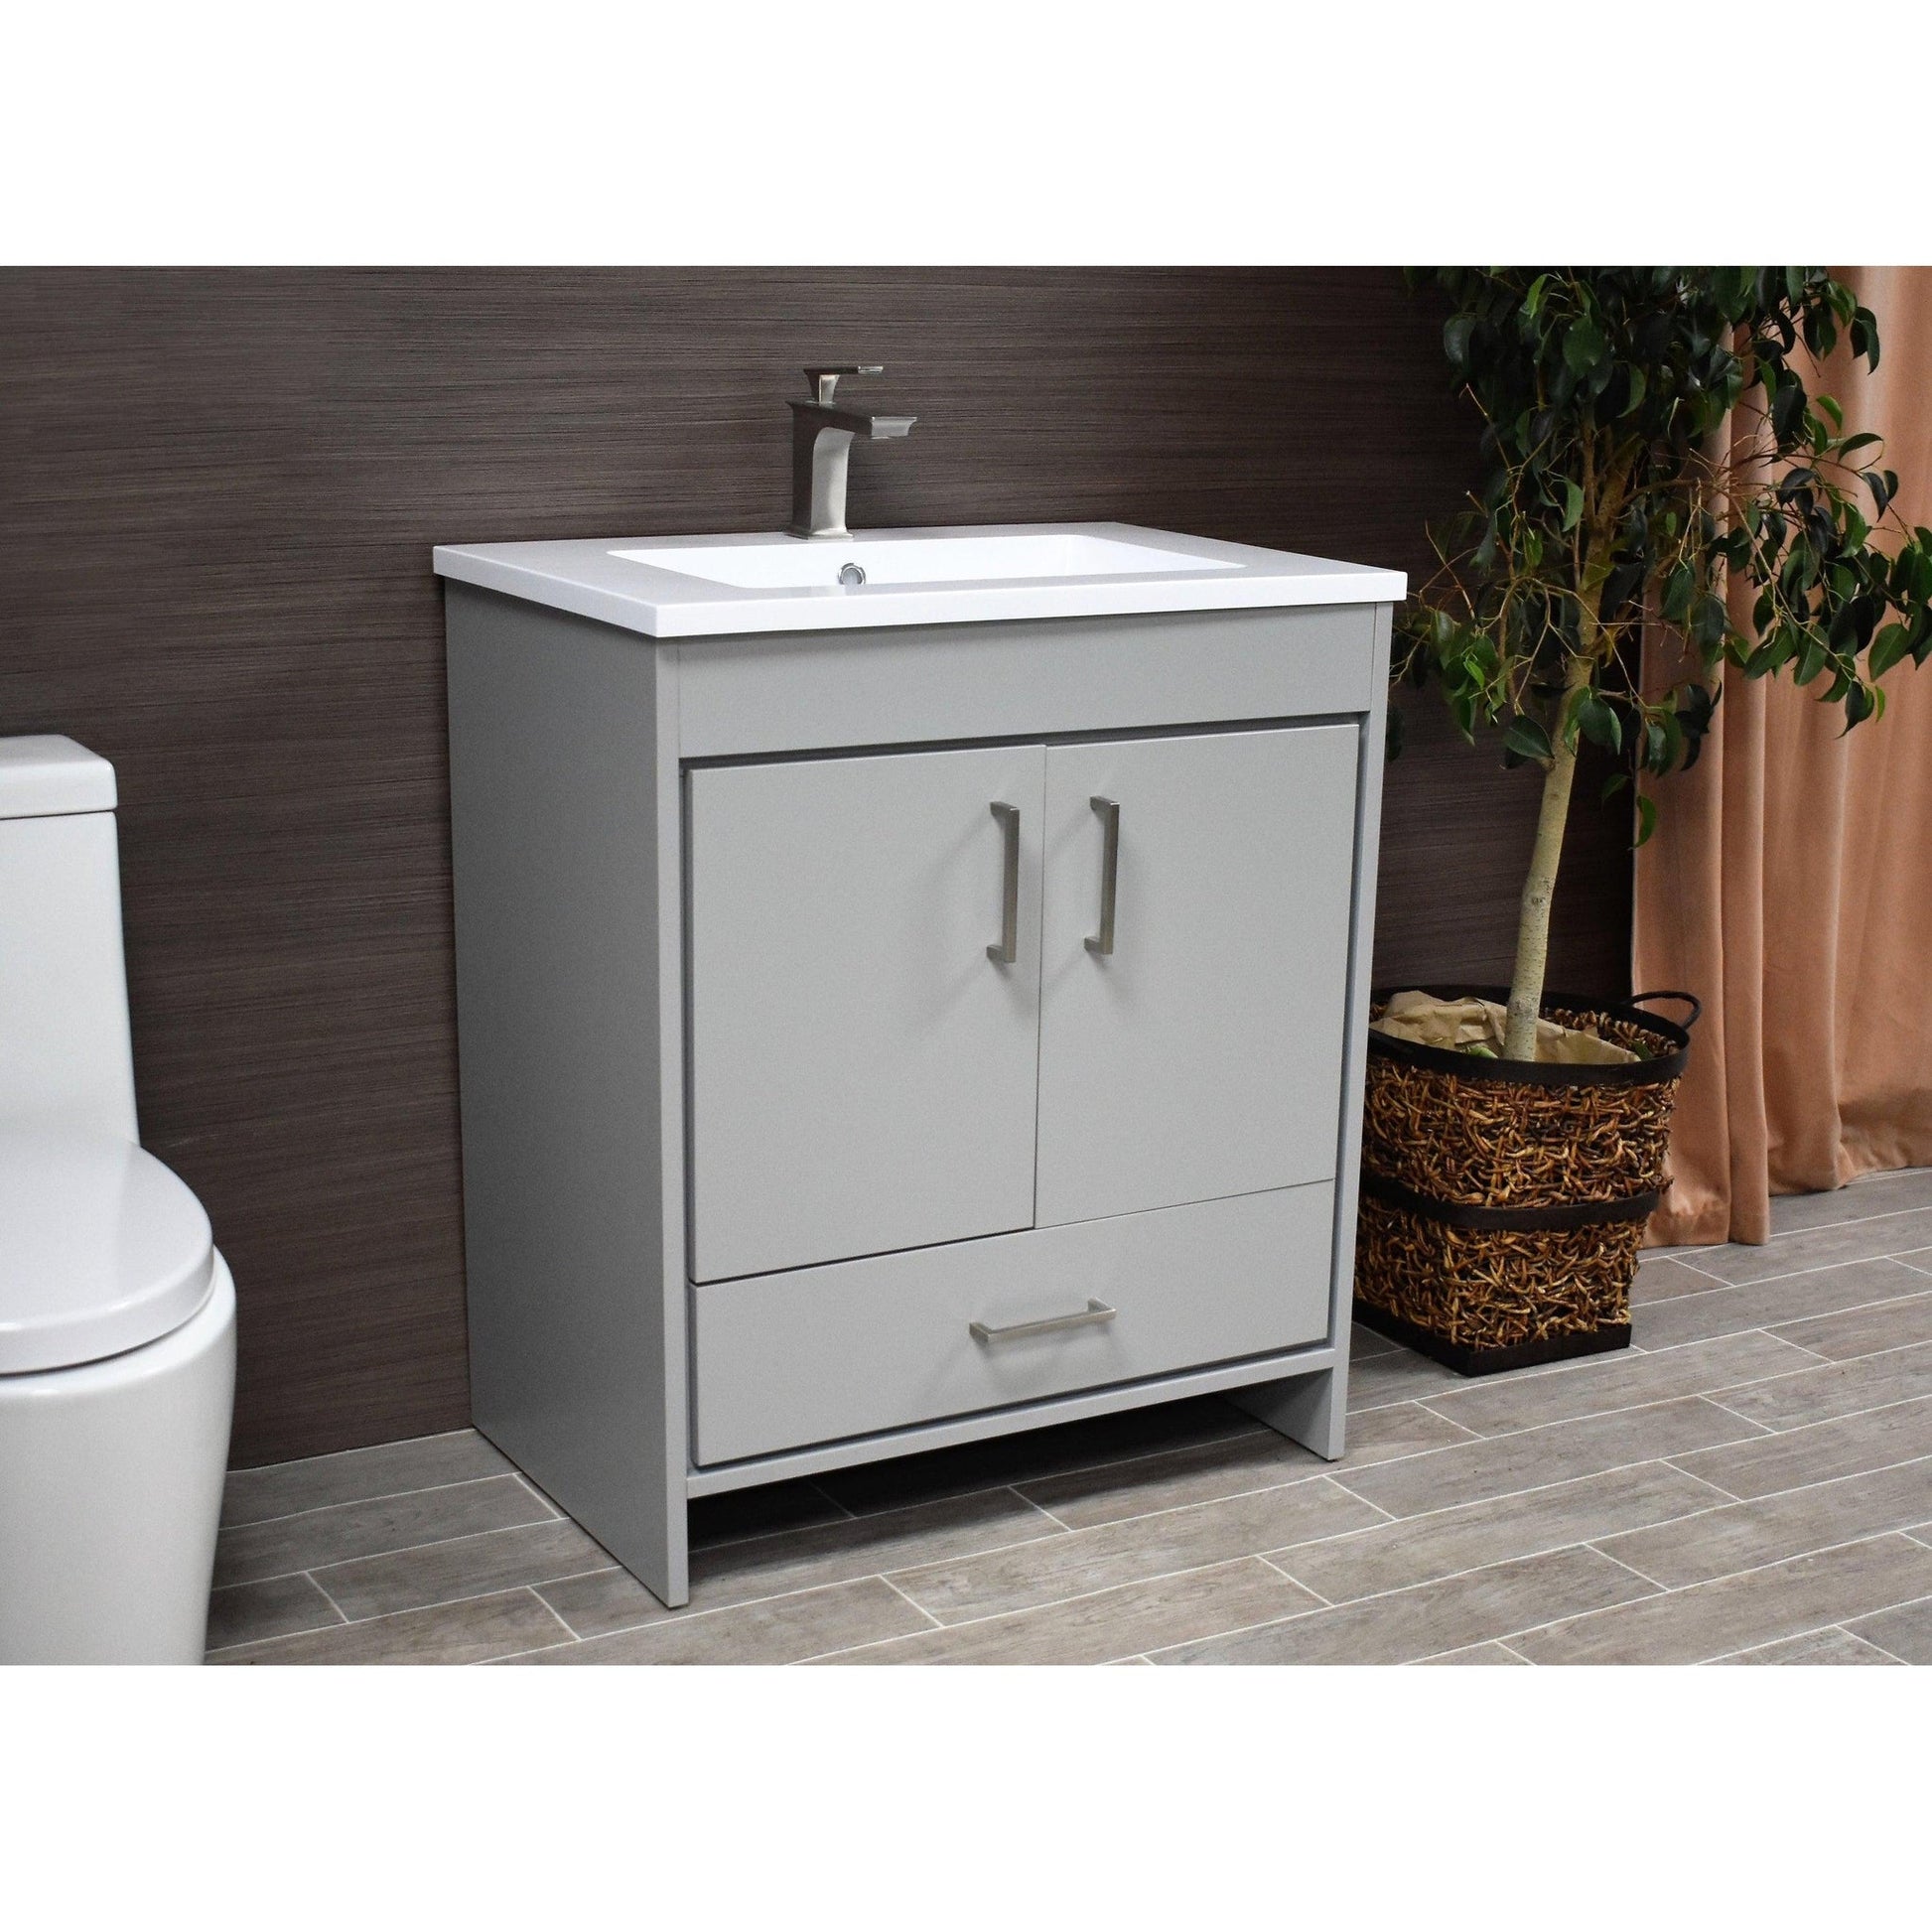 Volpa USA Rio 30" Grey Freestanding Modern Bathroom Vanity With Integrated Acrylic Top and Brushed Nickel Handles